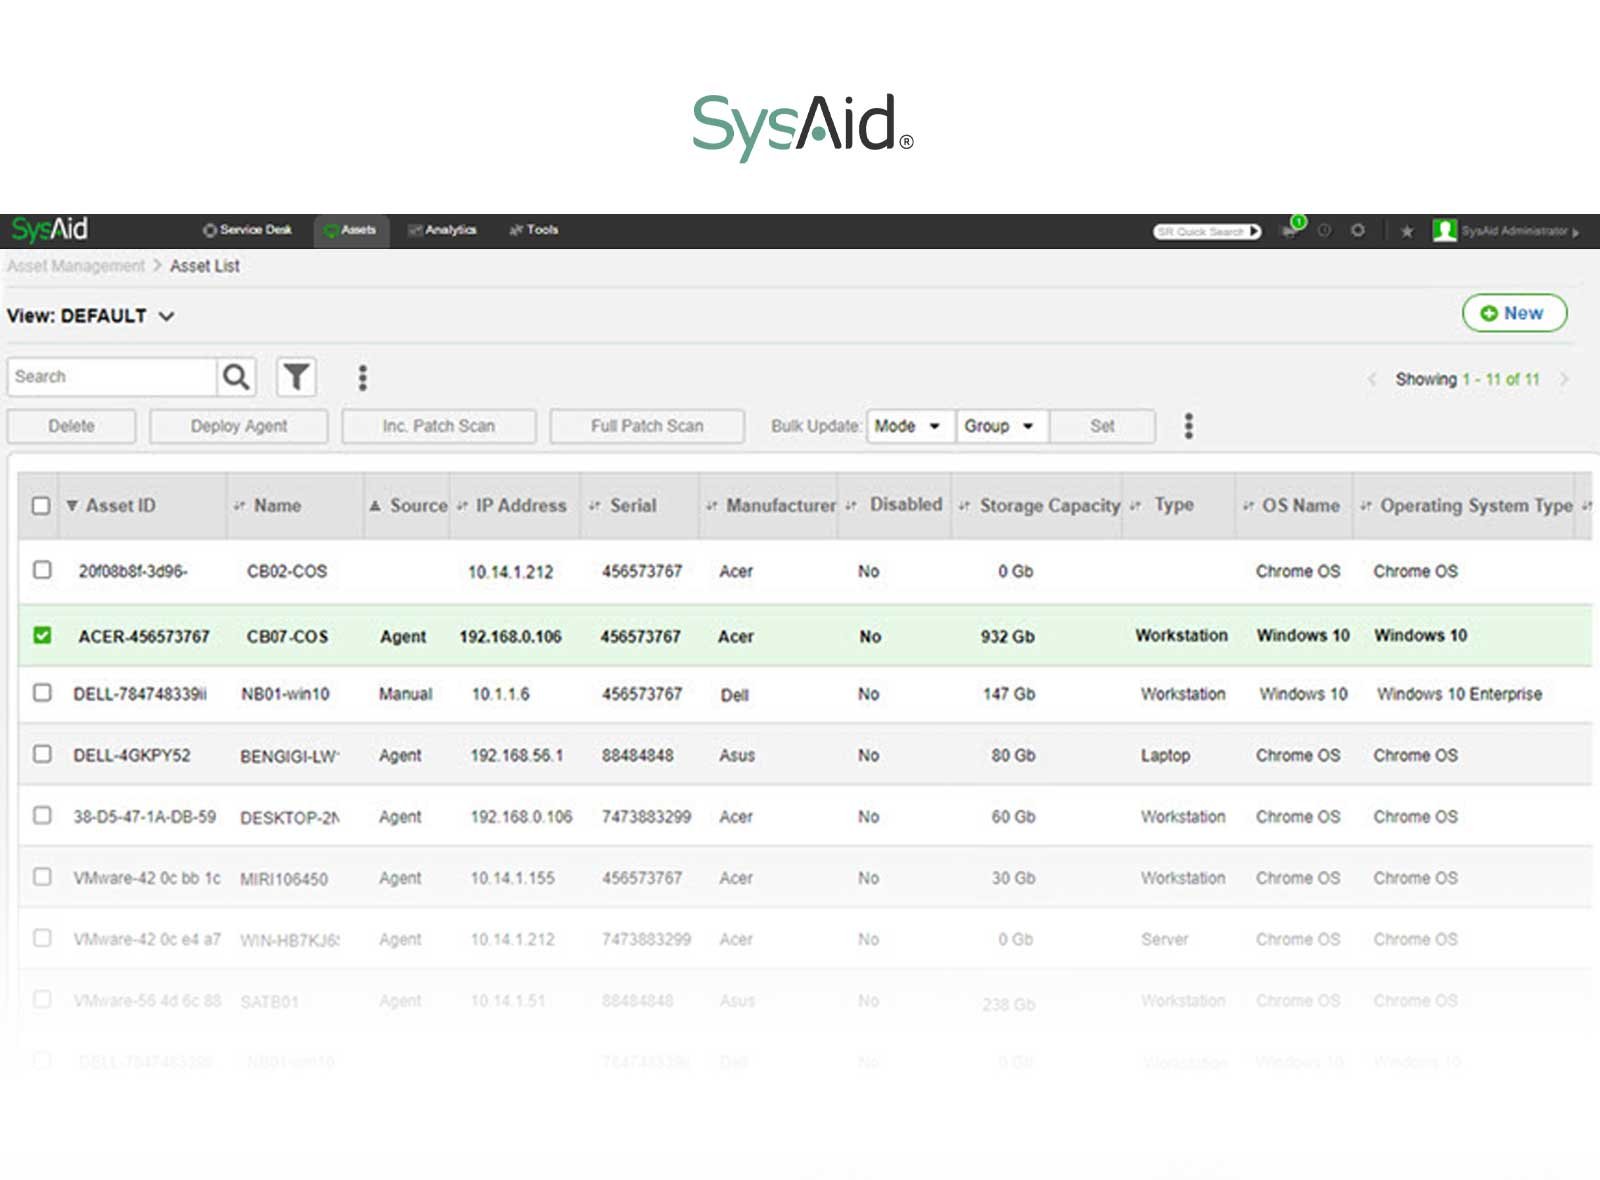 Example of SysAid's interface.